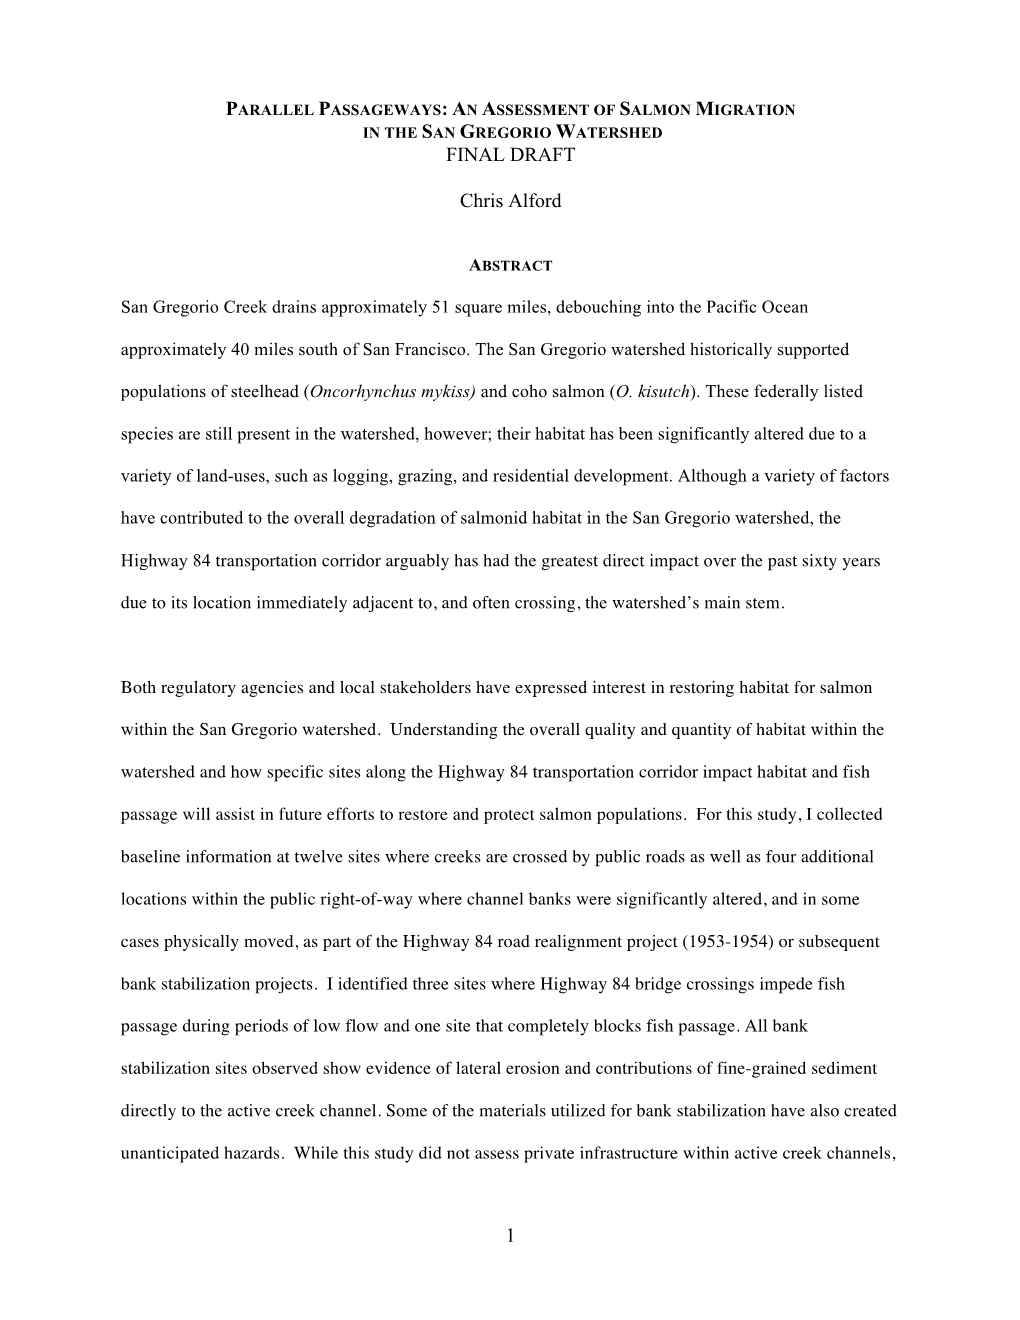 An Assessment of Salmon Migration in the San Gregorio Watershed Final Draft